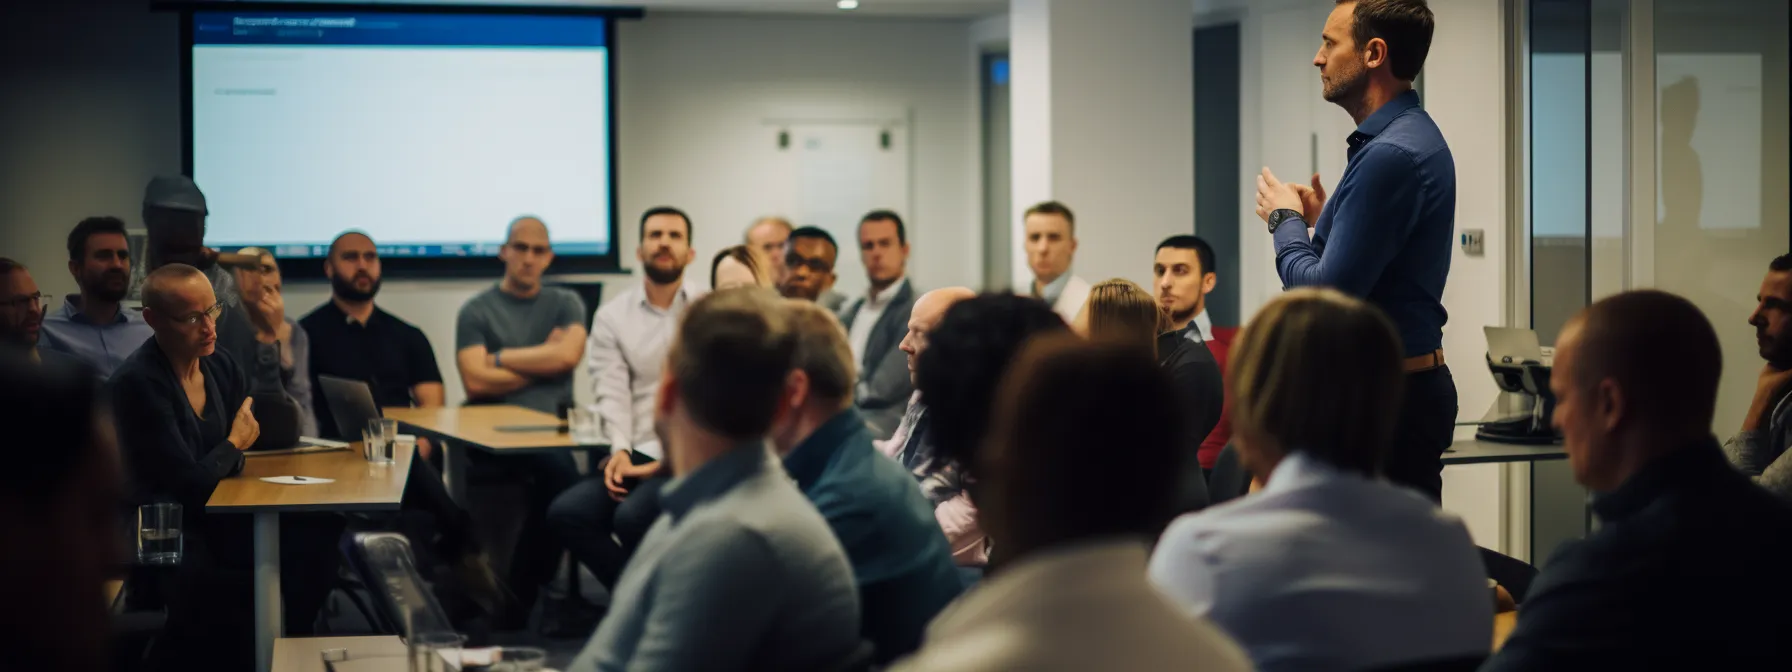 a group of people in a training room, listening attentively to a presenter discussing seo strategies and techniques.